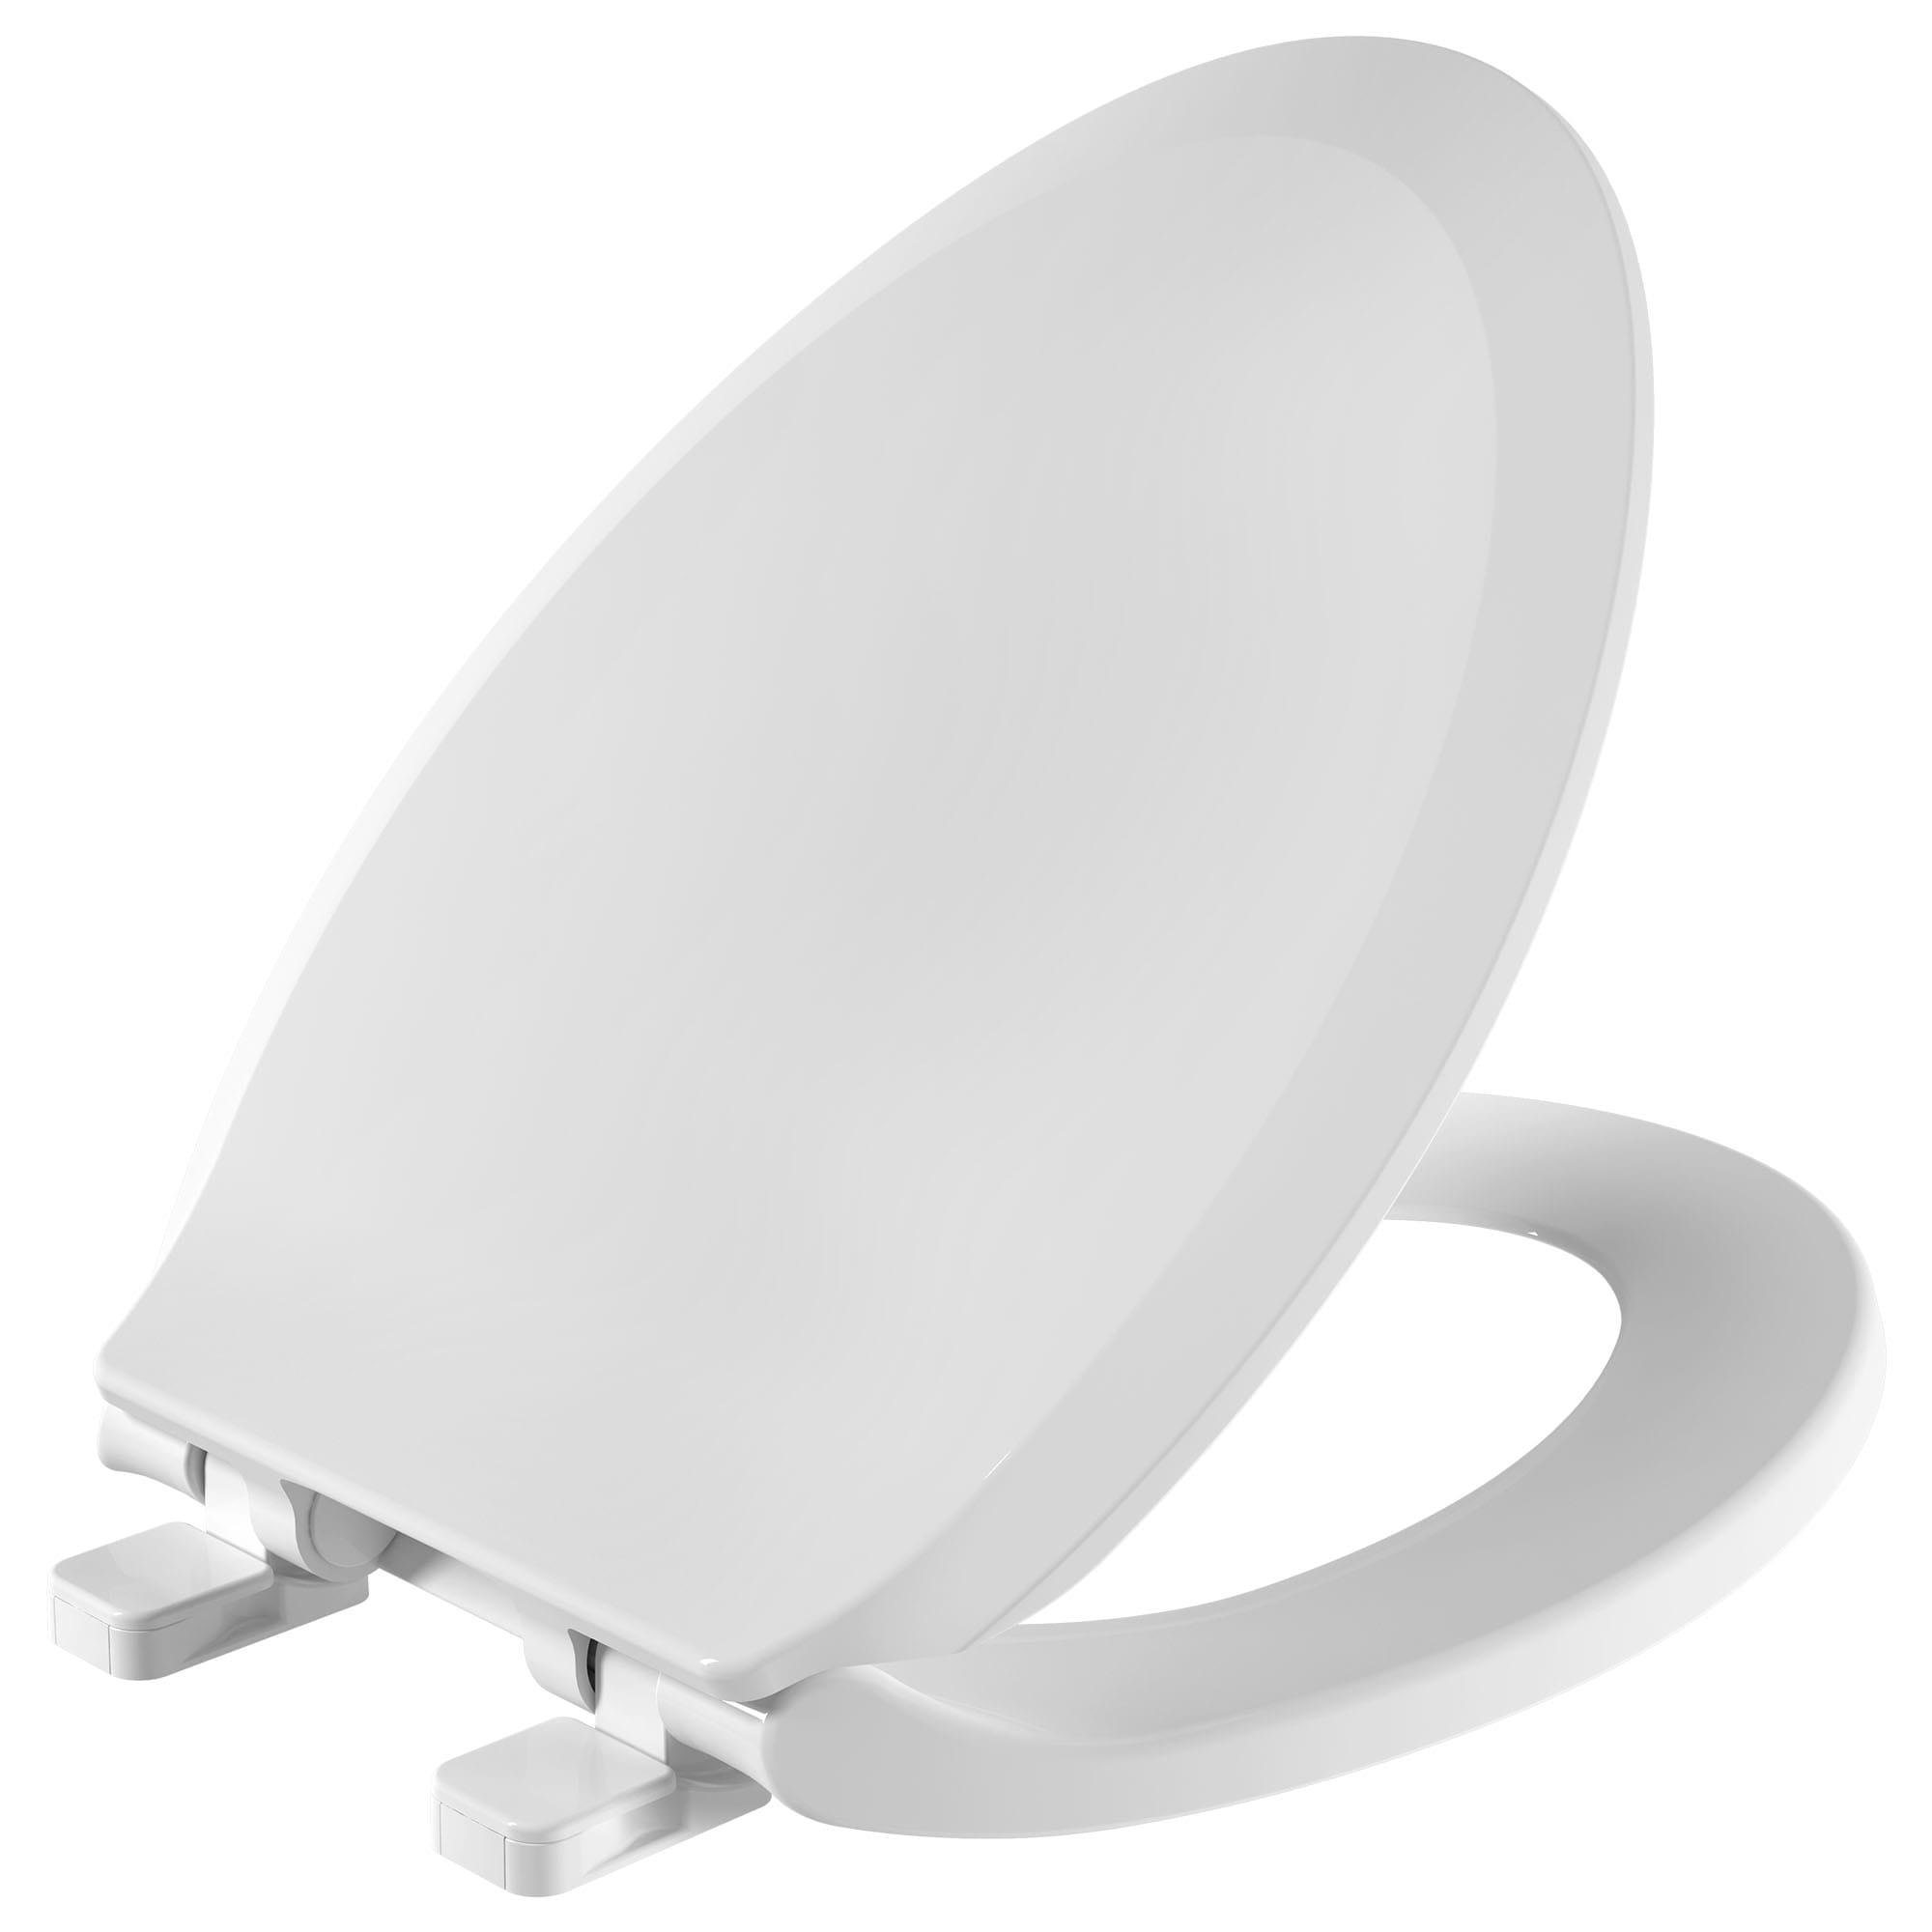 American Standard 5281.110.020 Cadet Round Front Slow Close Easy Lift Toilet Seat White